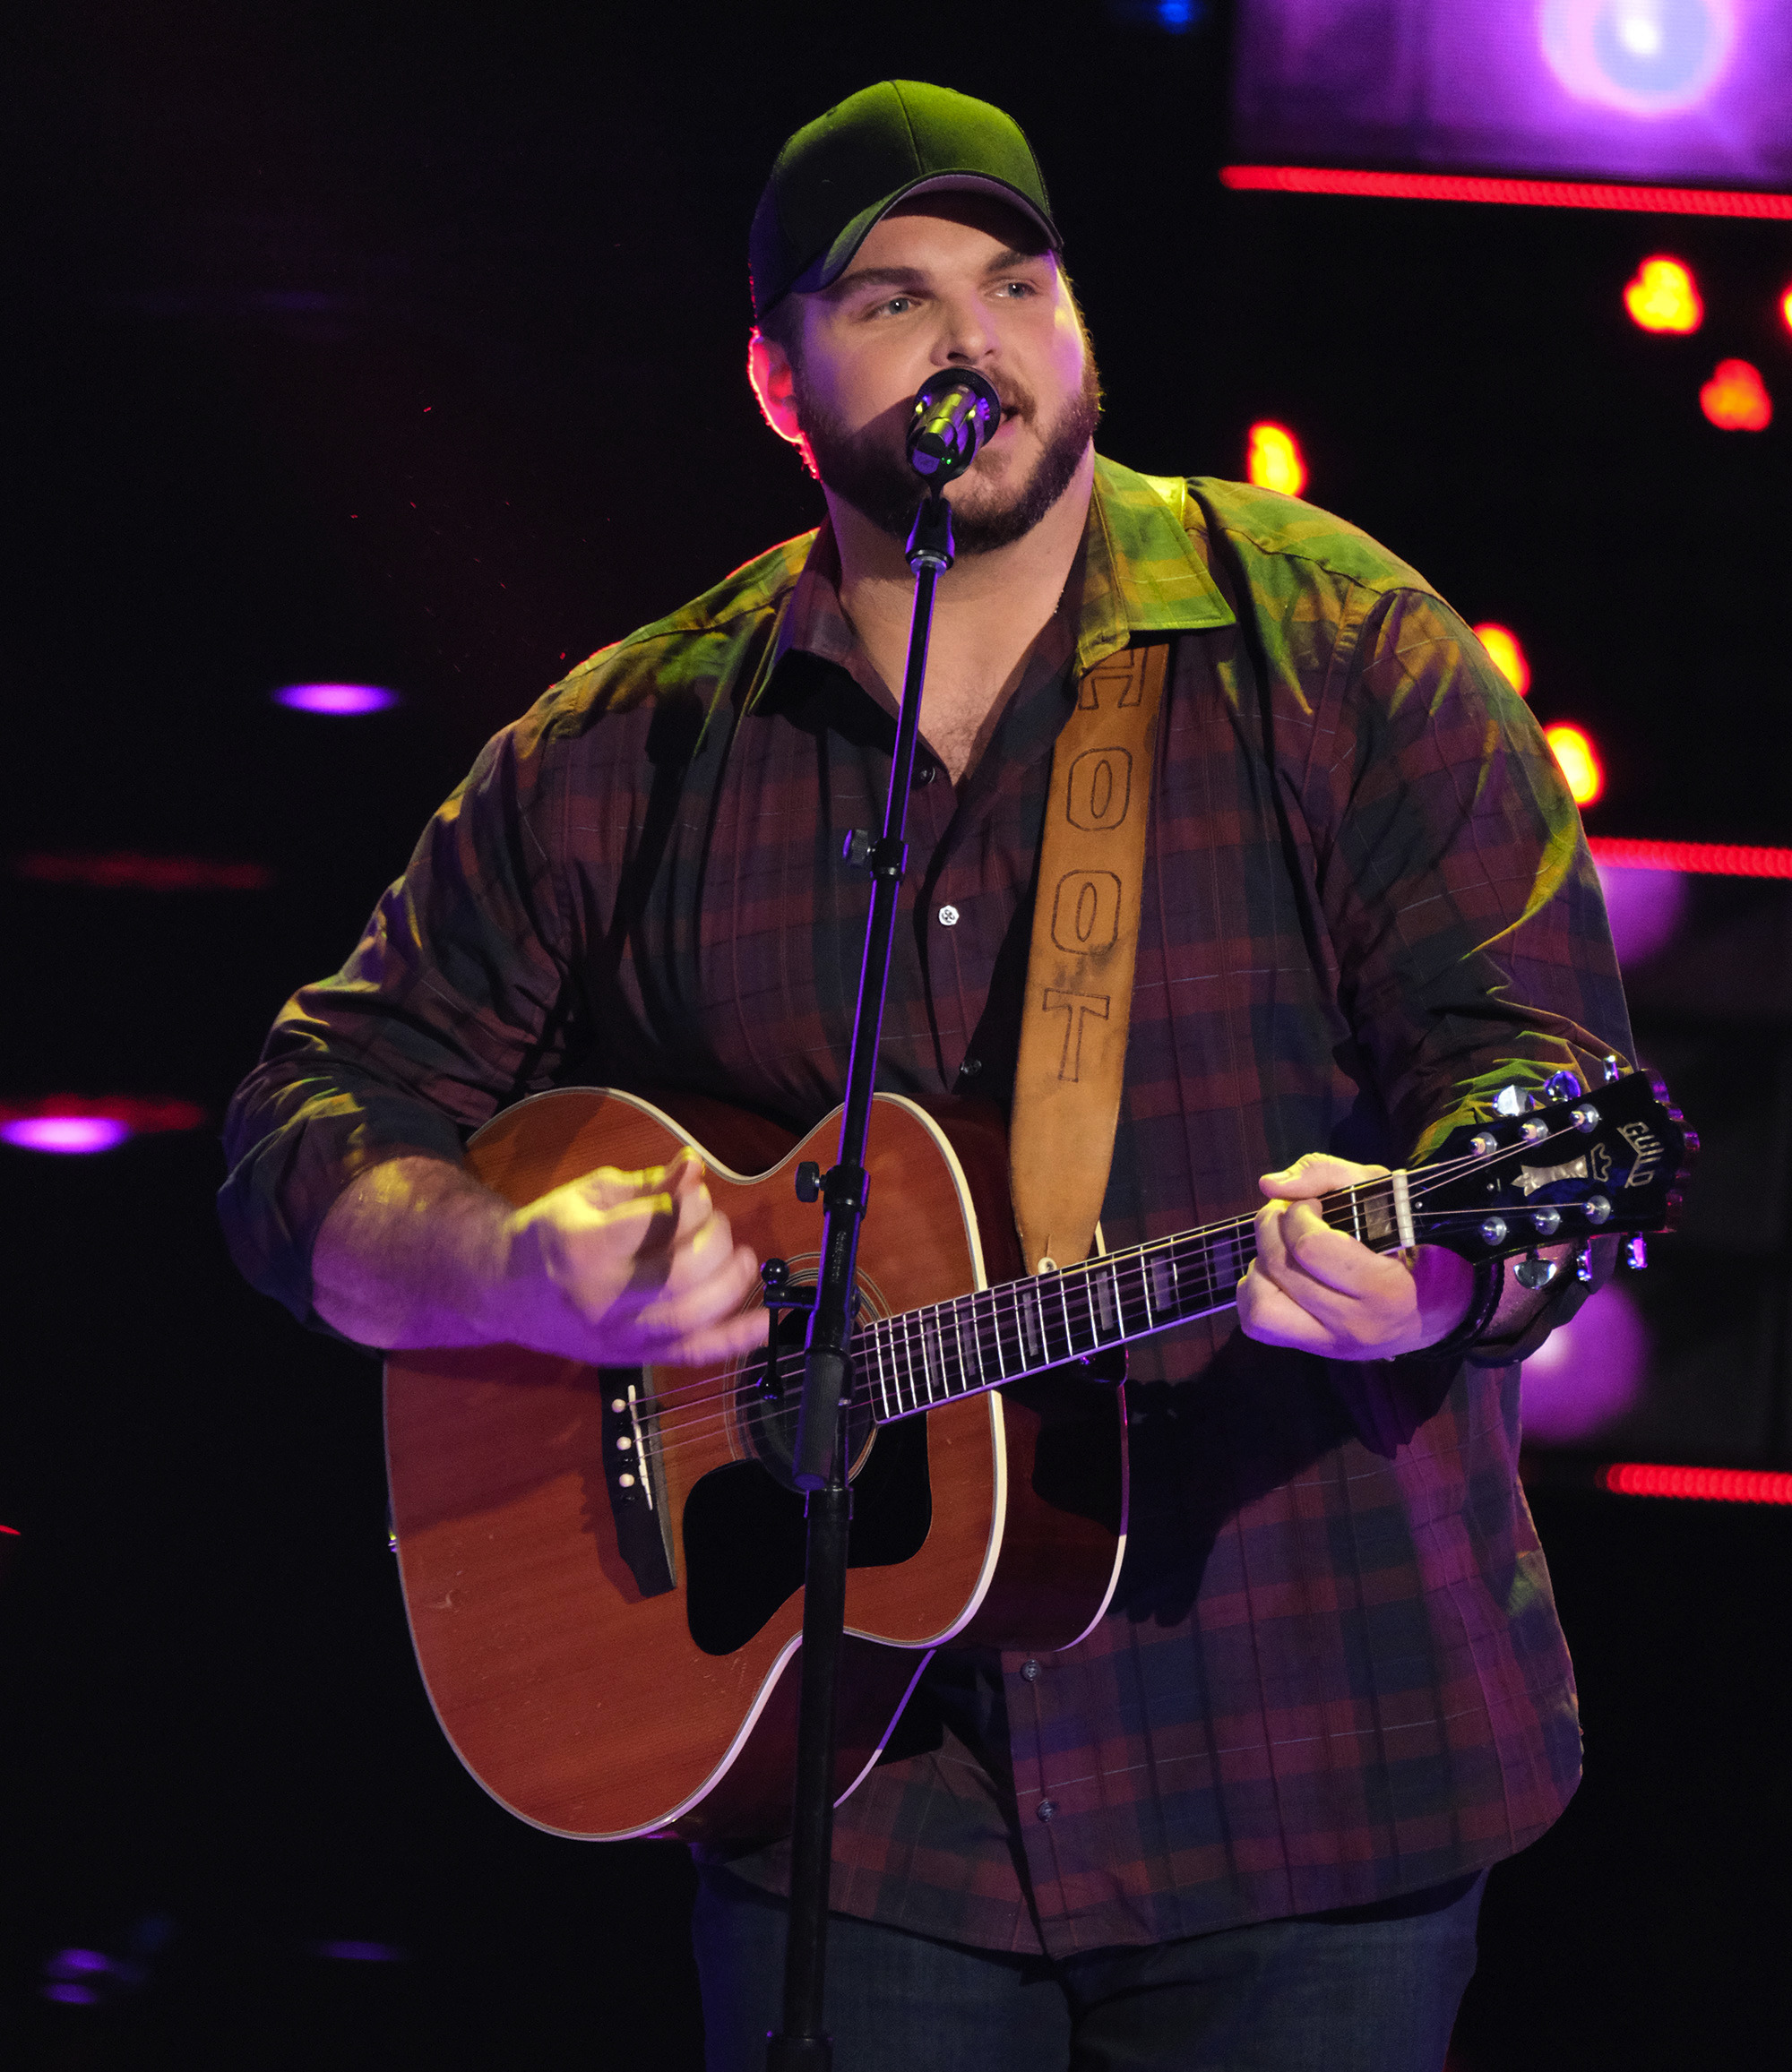 A 2013 Tech graduate in interdisciplinary studies, Jake Hoot took a big first step toward stardom by landing a spot on The Voice, a singing competition television series broadcast on NBC. 